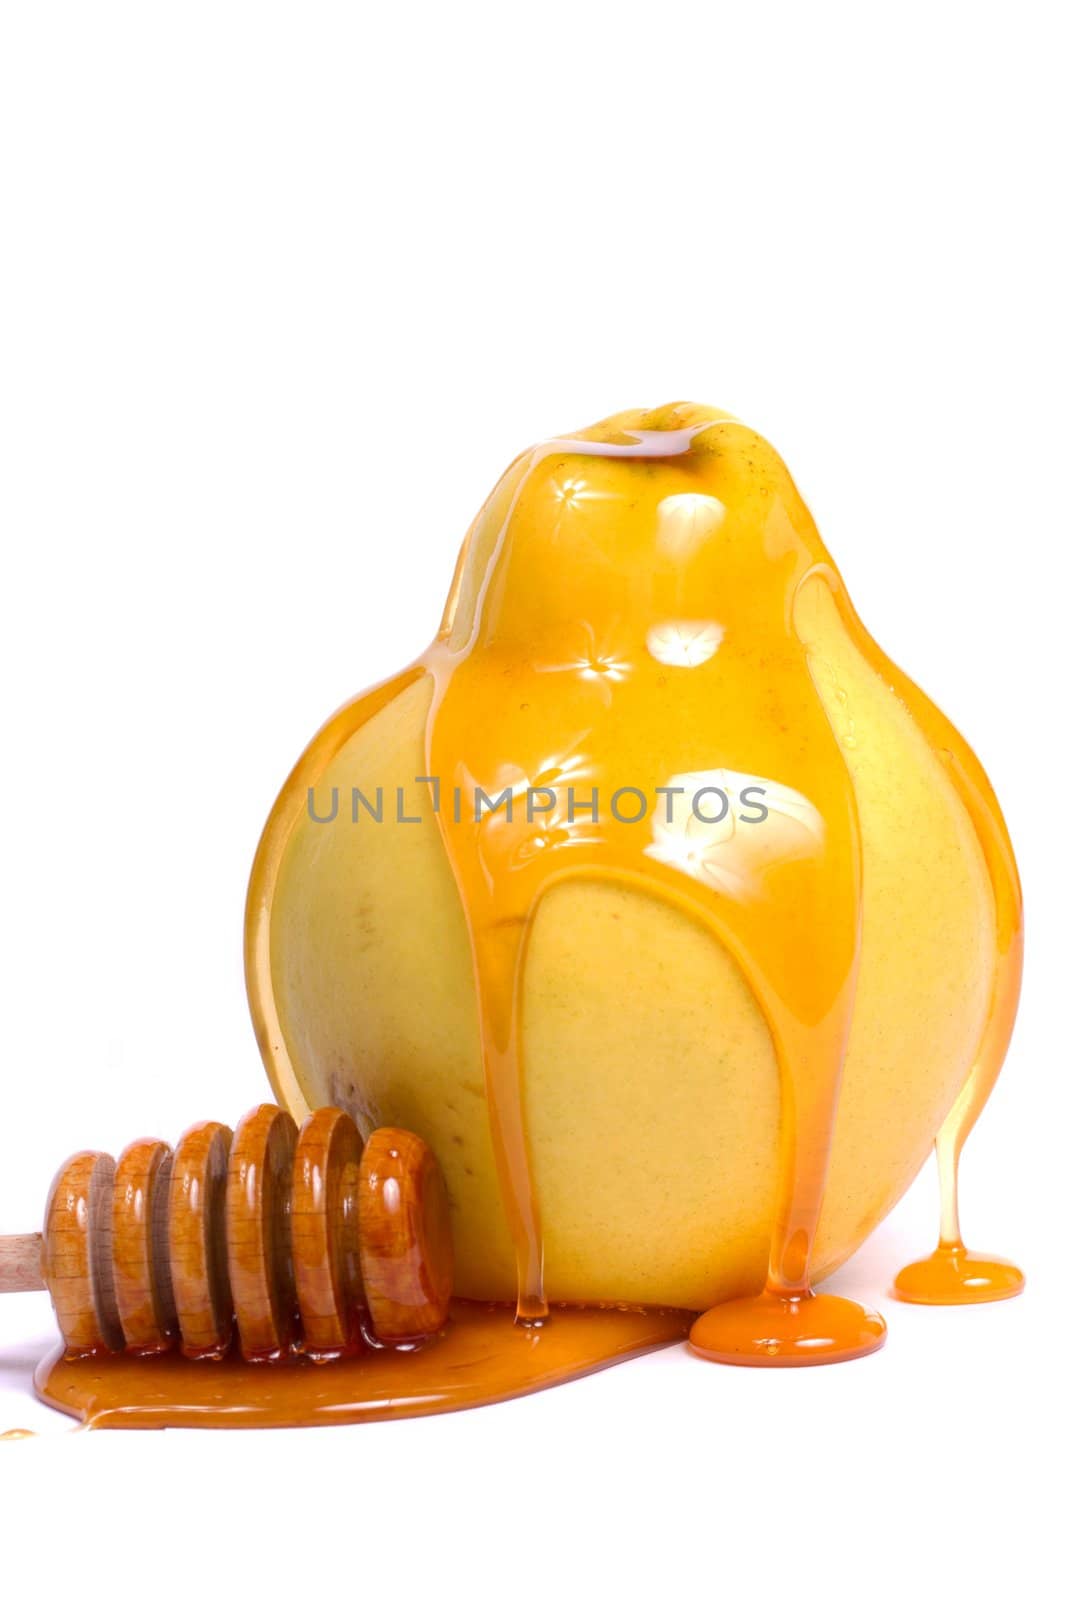 Close up view of a quince fruit with a honey dipper isolated on a white background.